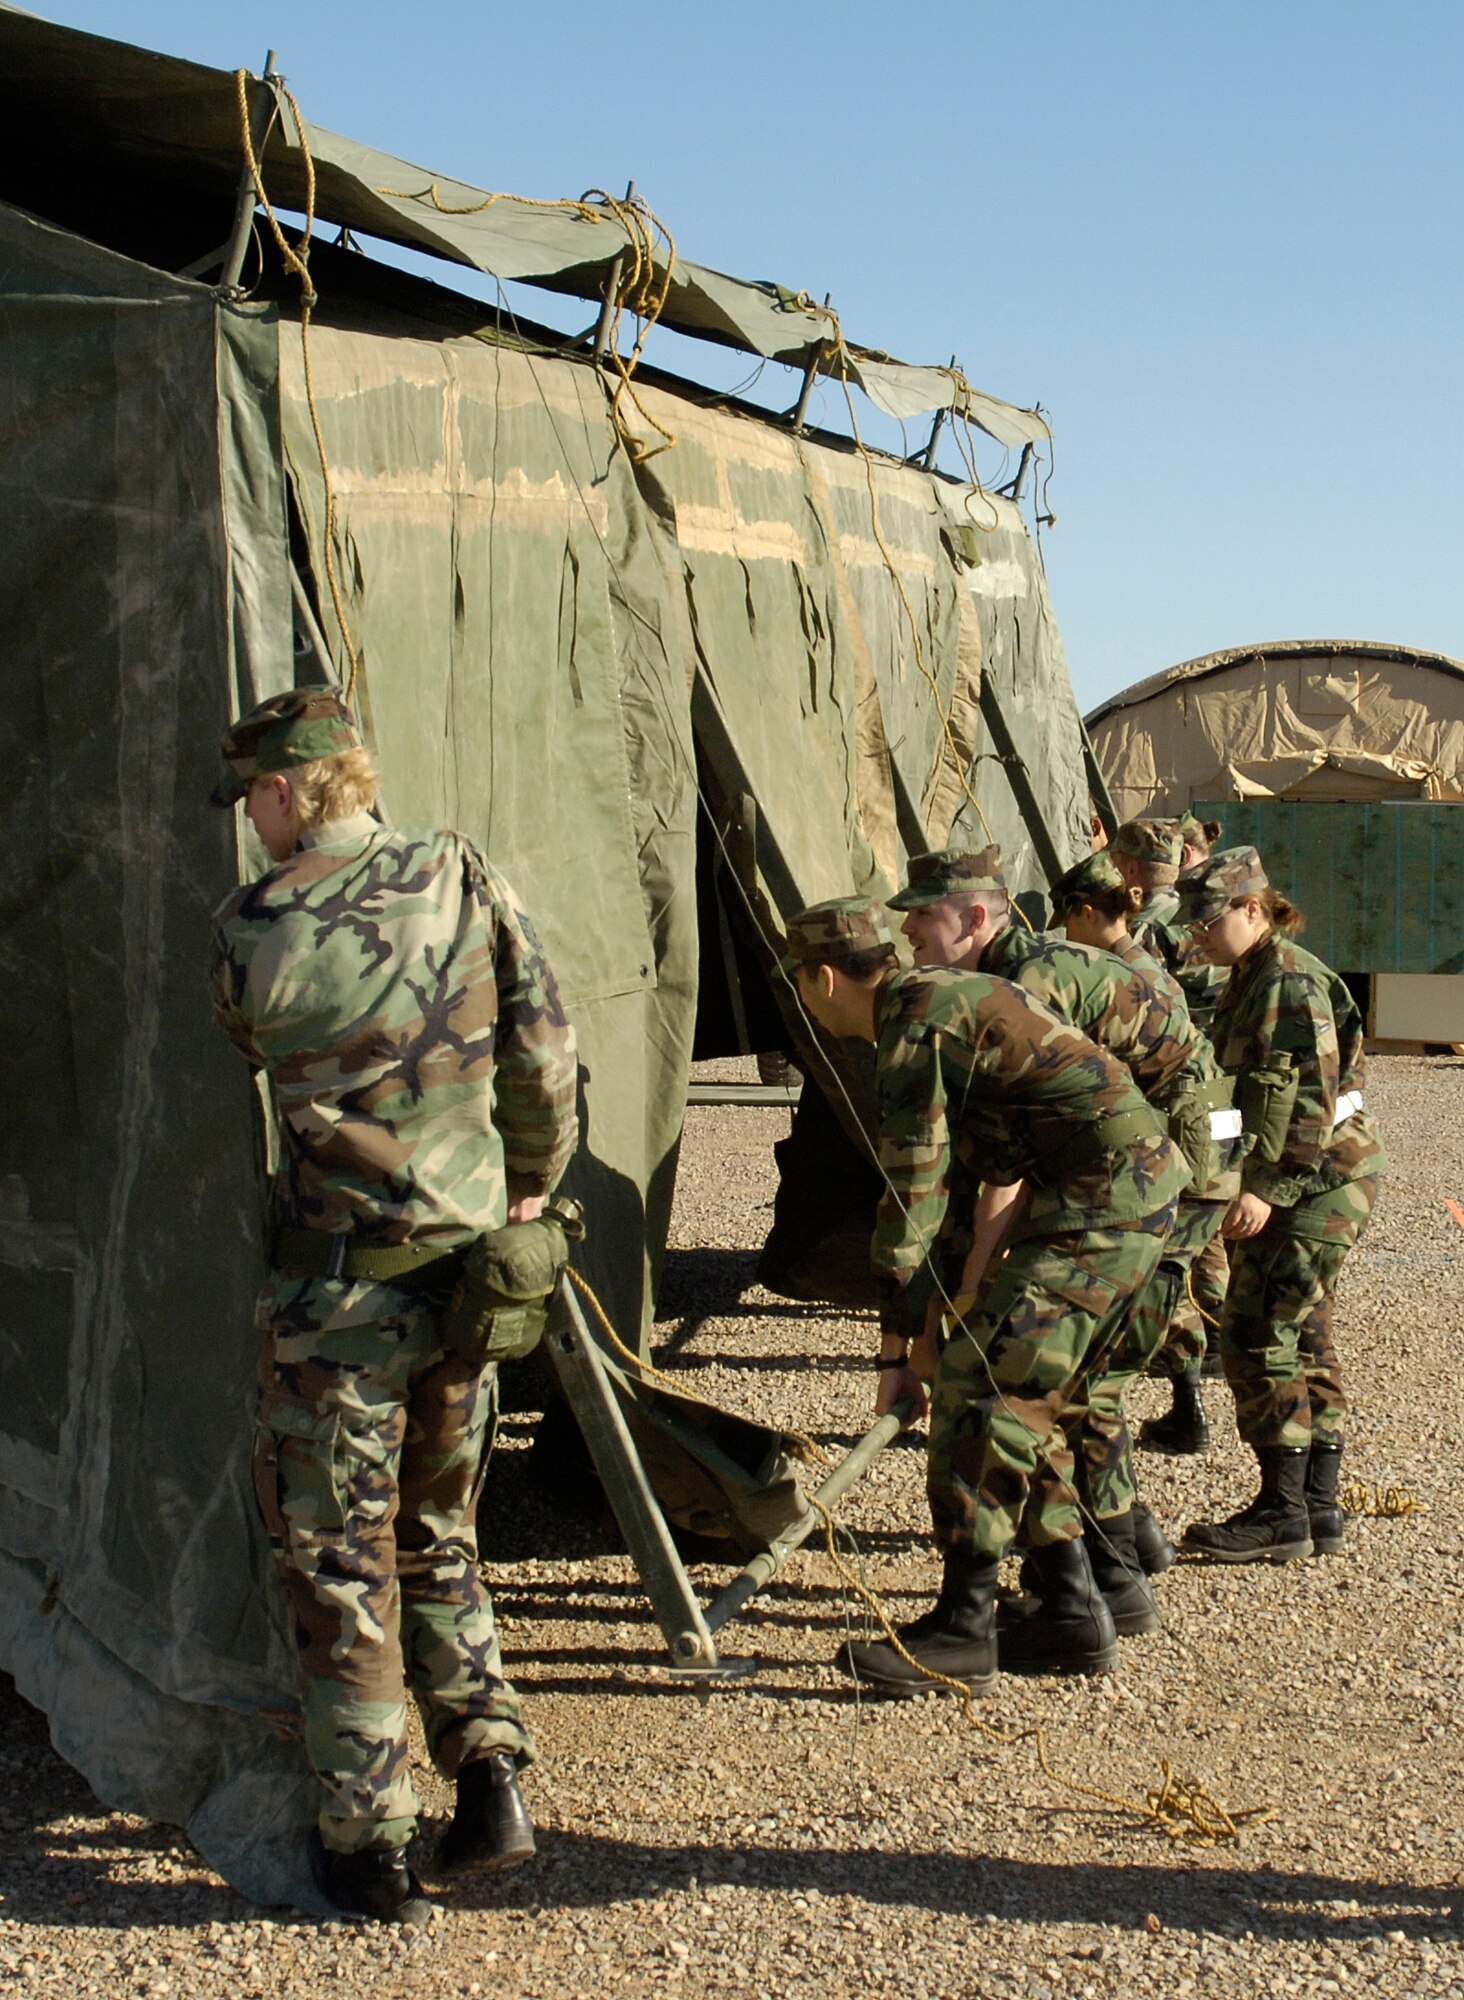 Airmen help set up a tent for tent city where more than 250 Airmen lived during the Phase II exercise at Holloman. (U.S. Air Force photo by Airman 1st Class Michael Means)